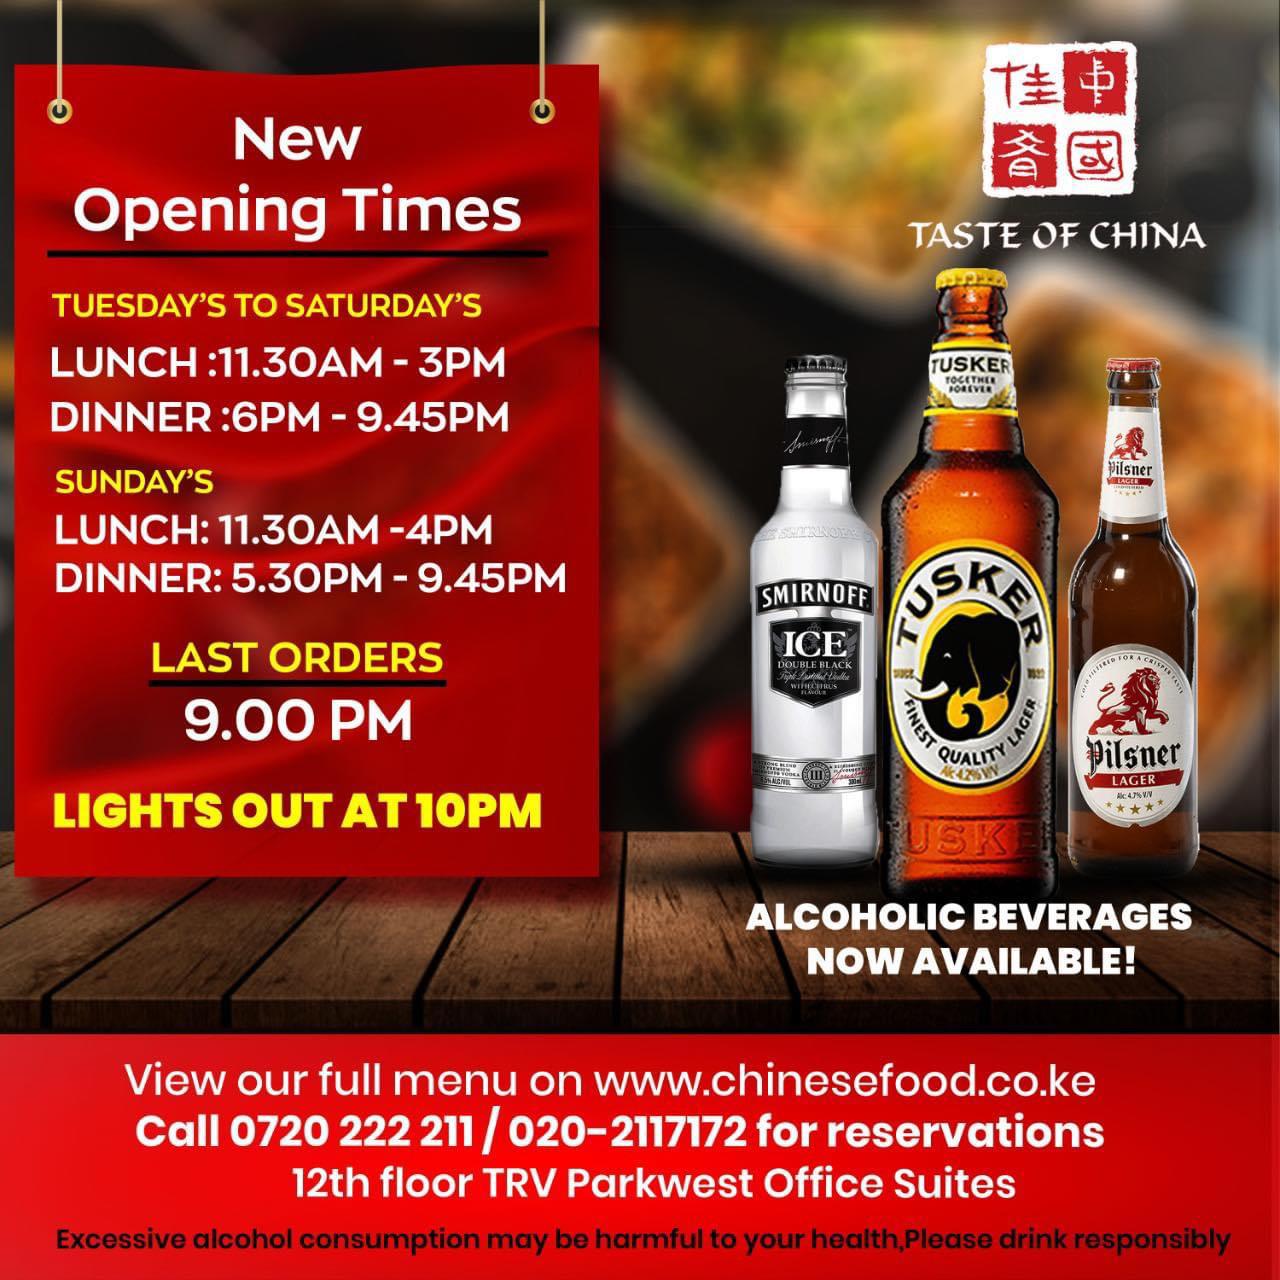 Taste Of China- We're Opened, Come Enjoy Great Food With A Great View